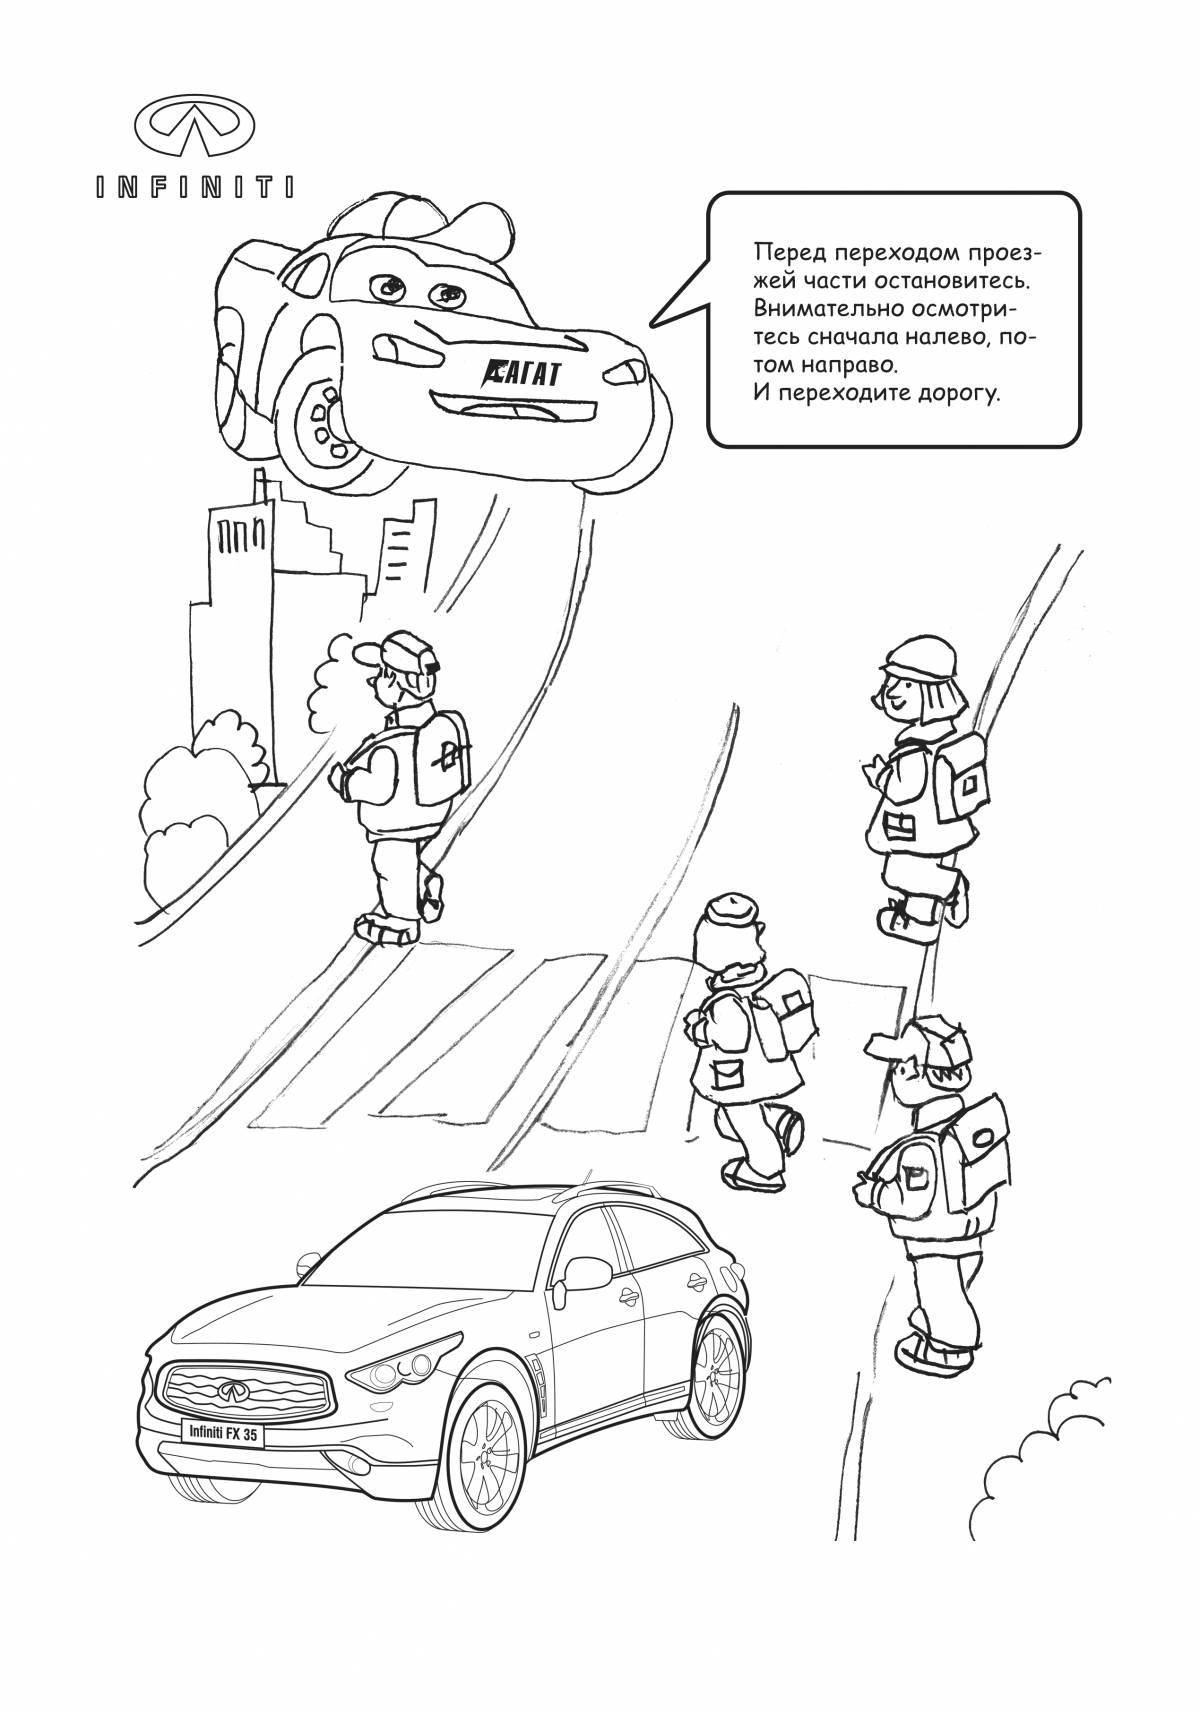 Adorable winter road coloring page for kids